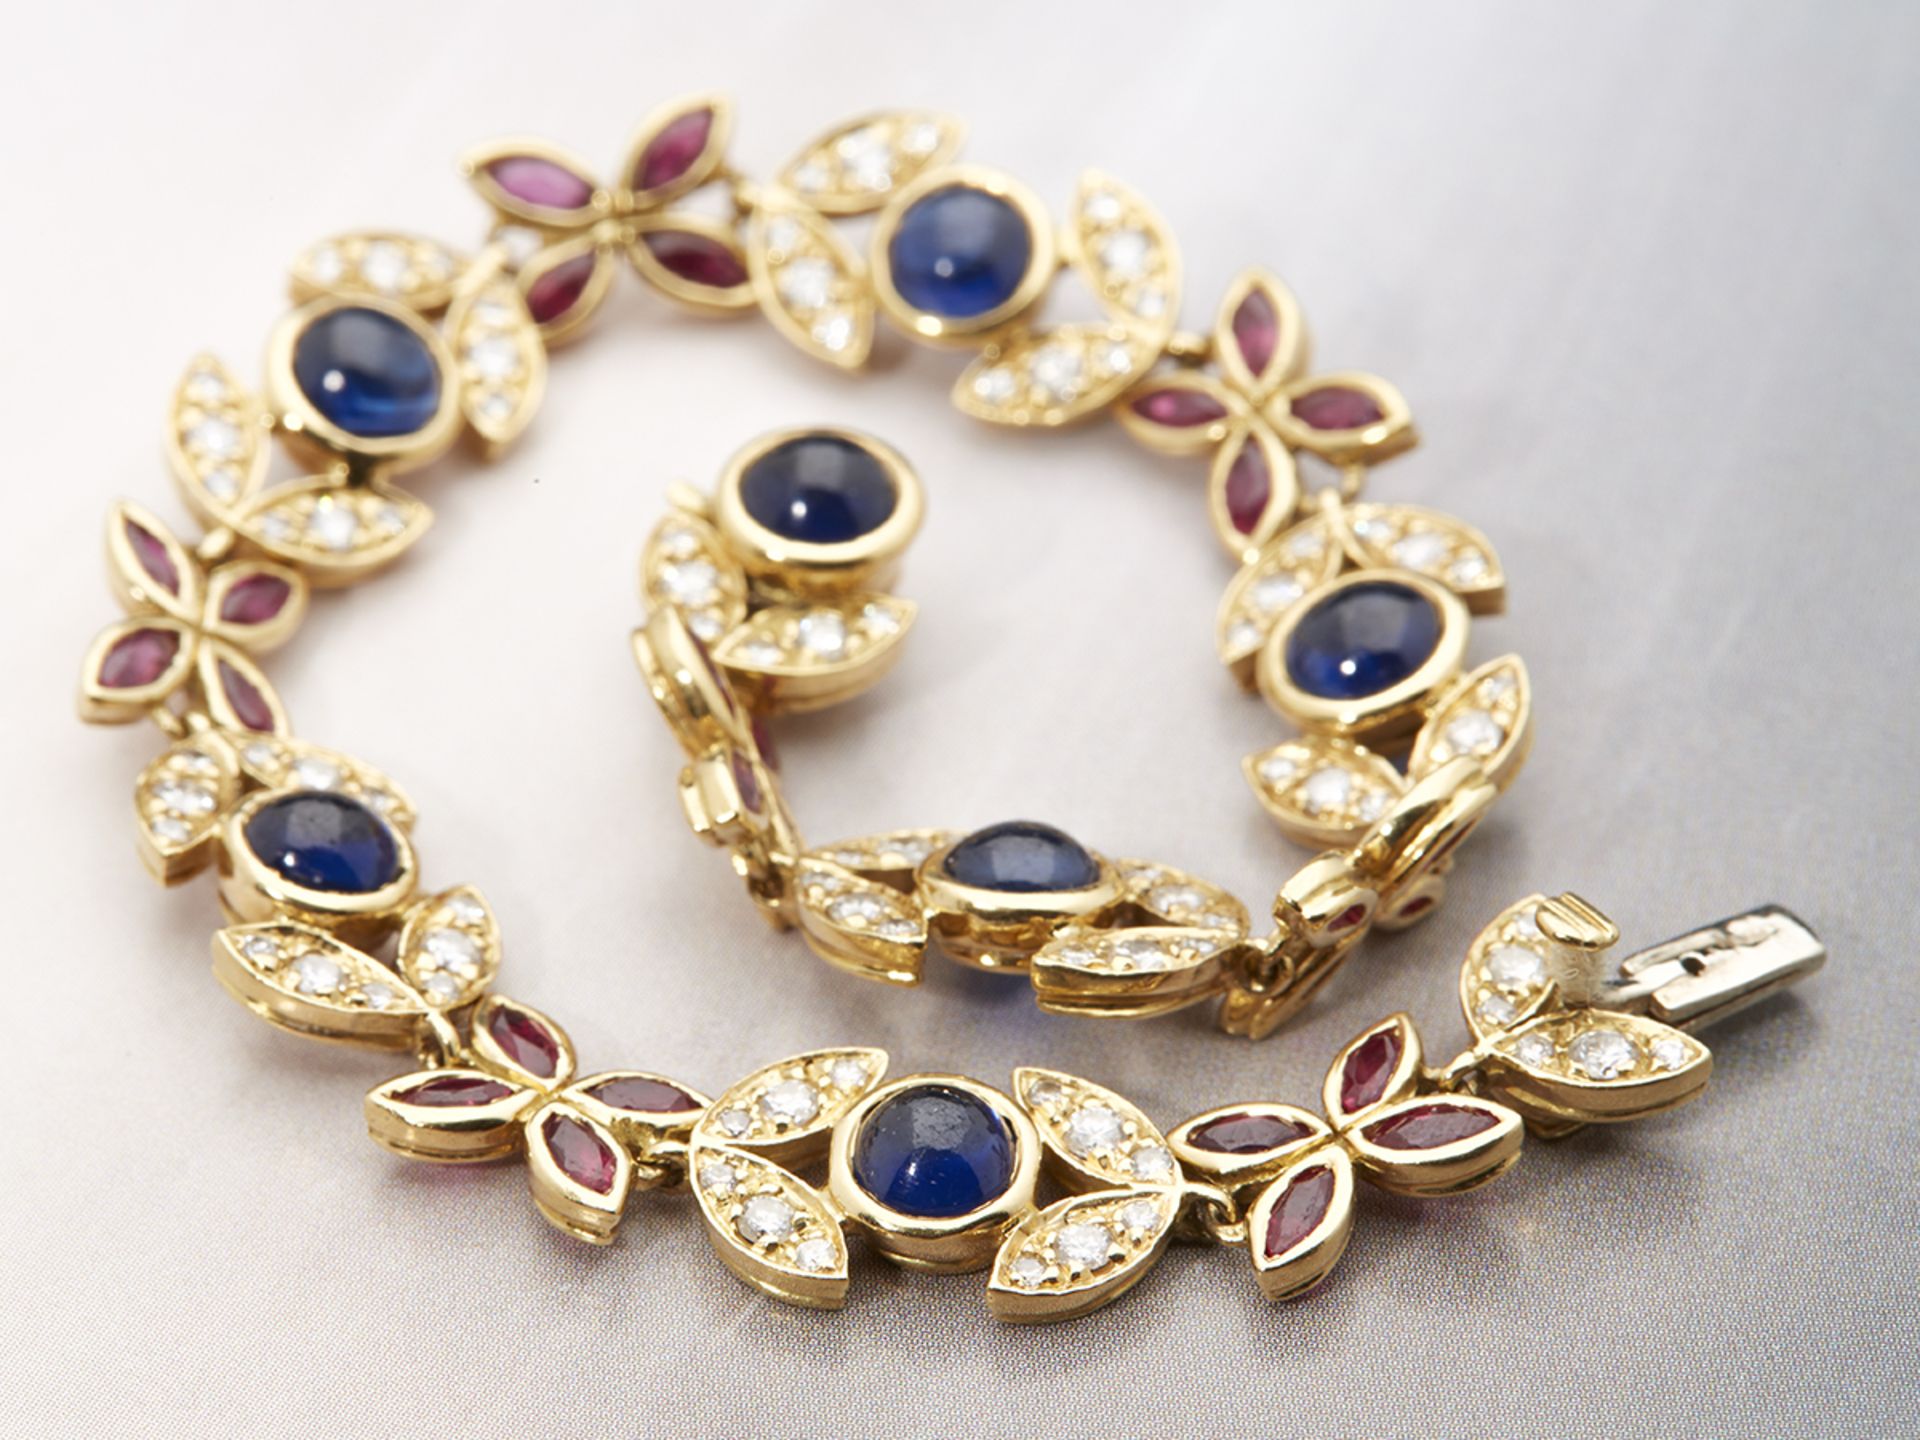 COM367 Fasoli - 18K Yellow Gold 9.45cts Sapphire, Ruby and Diamond Flower Link Bracelet - Image 4 of 5